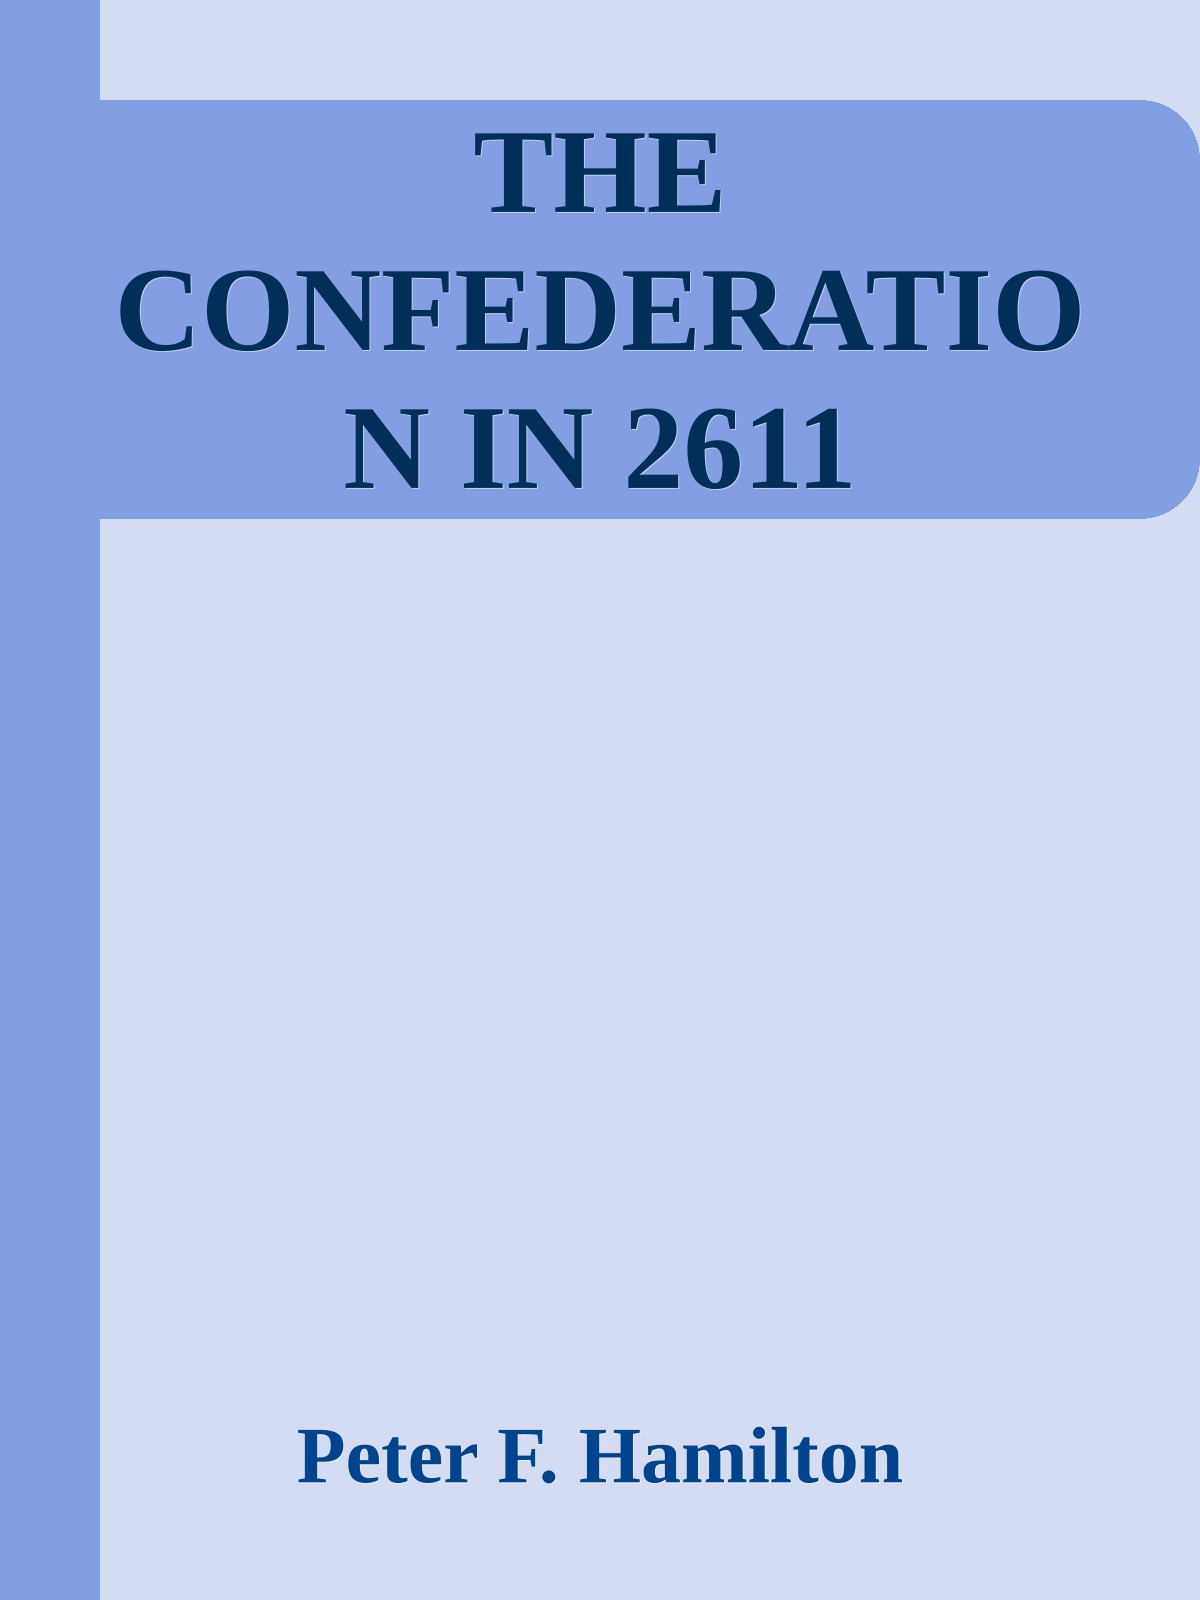 THE CONFEDERATION IN 2611